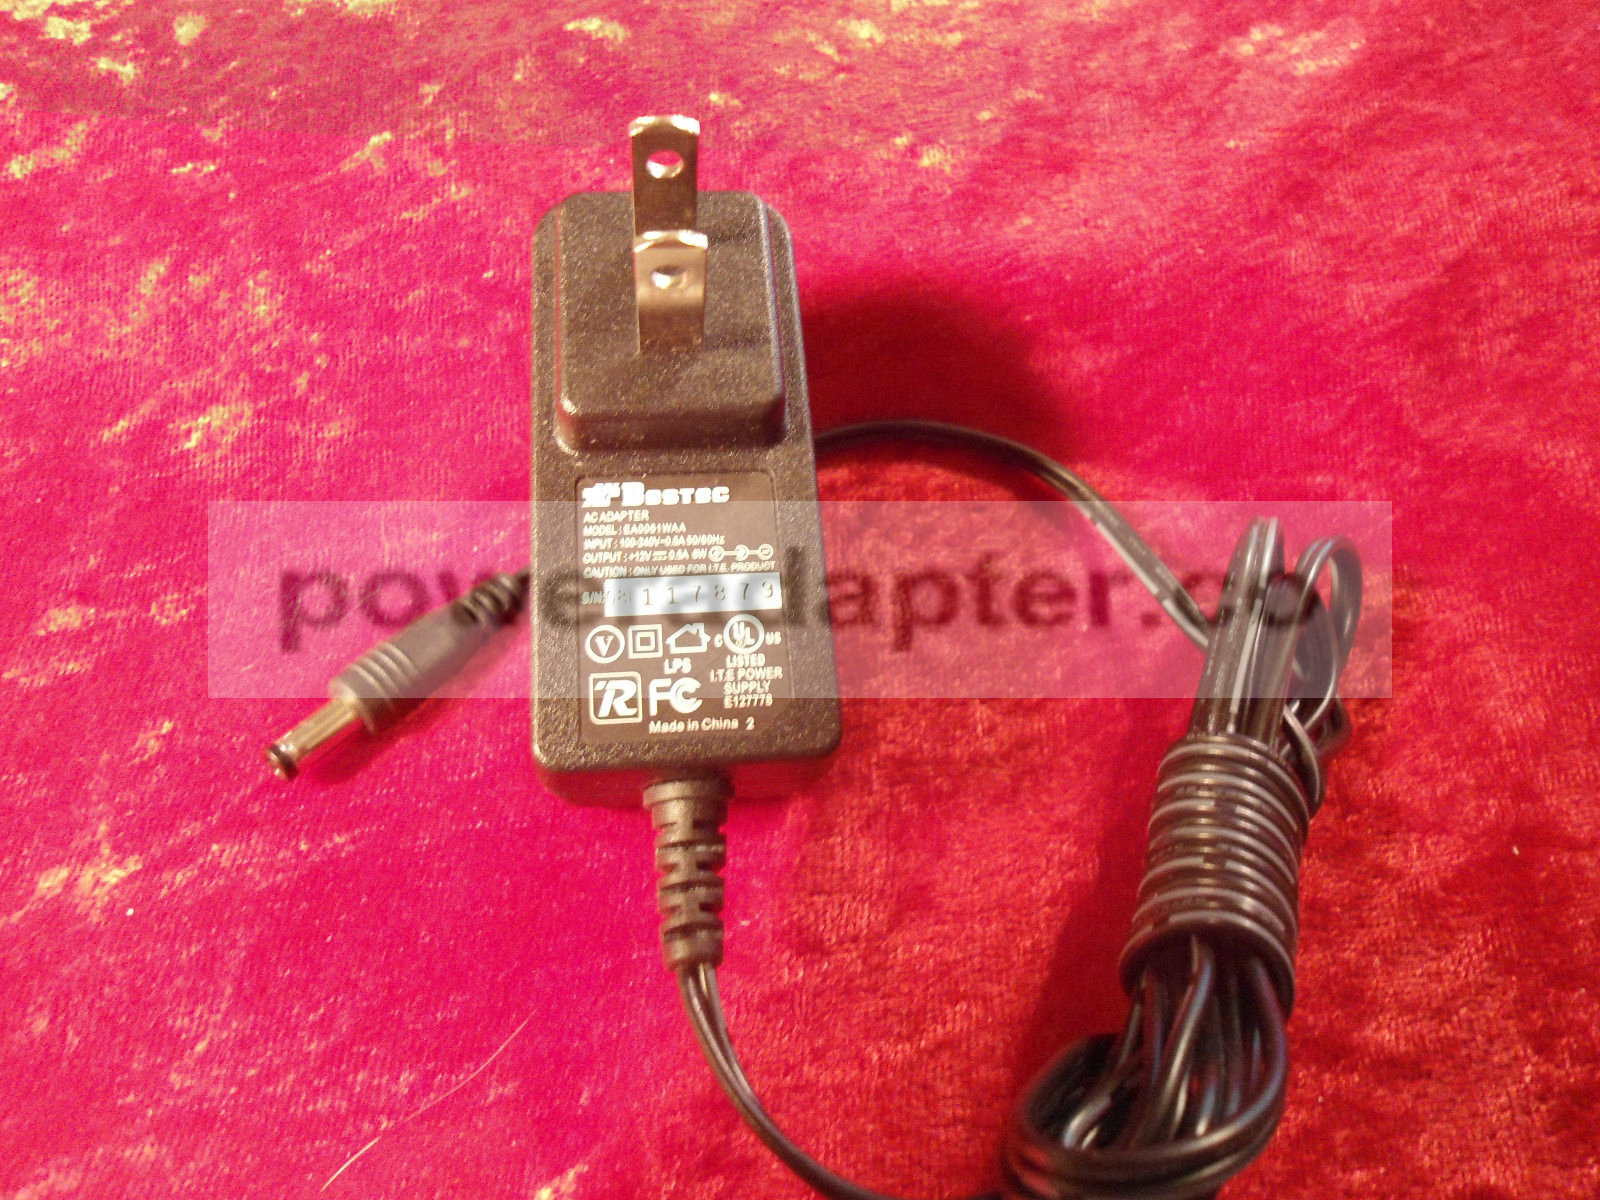 Bestec EA0061WAA AC Adapter Output: +12V Condition: Used : Seller Notes: “May come in white” Brand: Bestec MPN: EA0